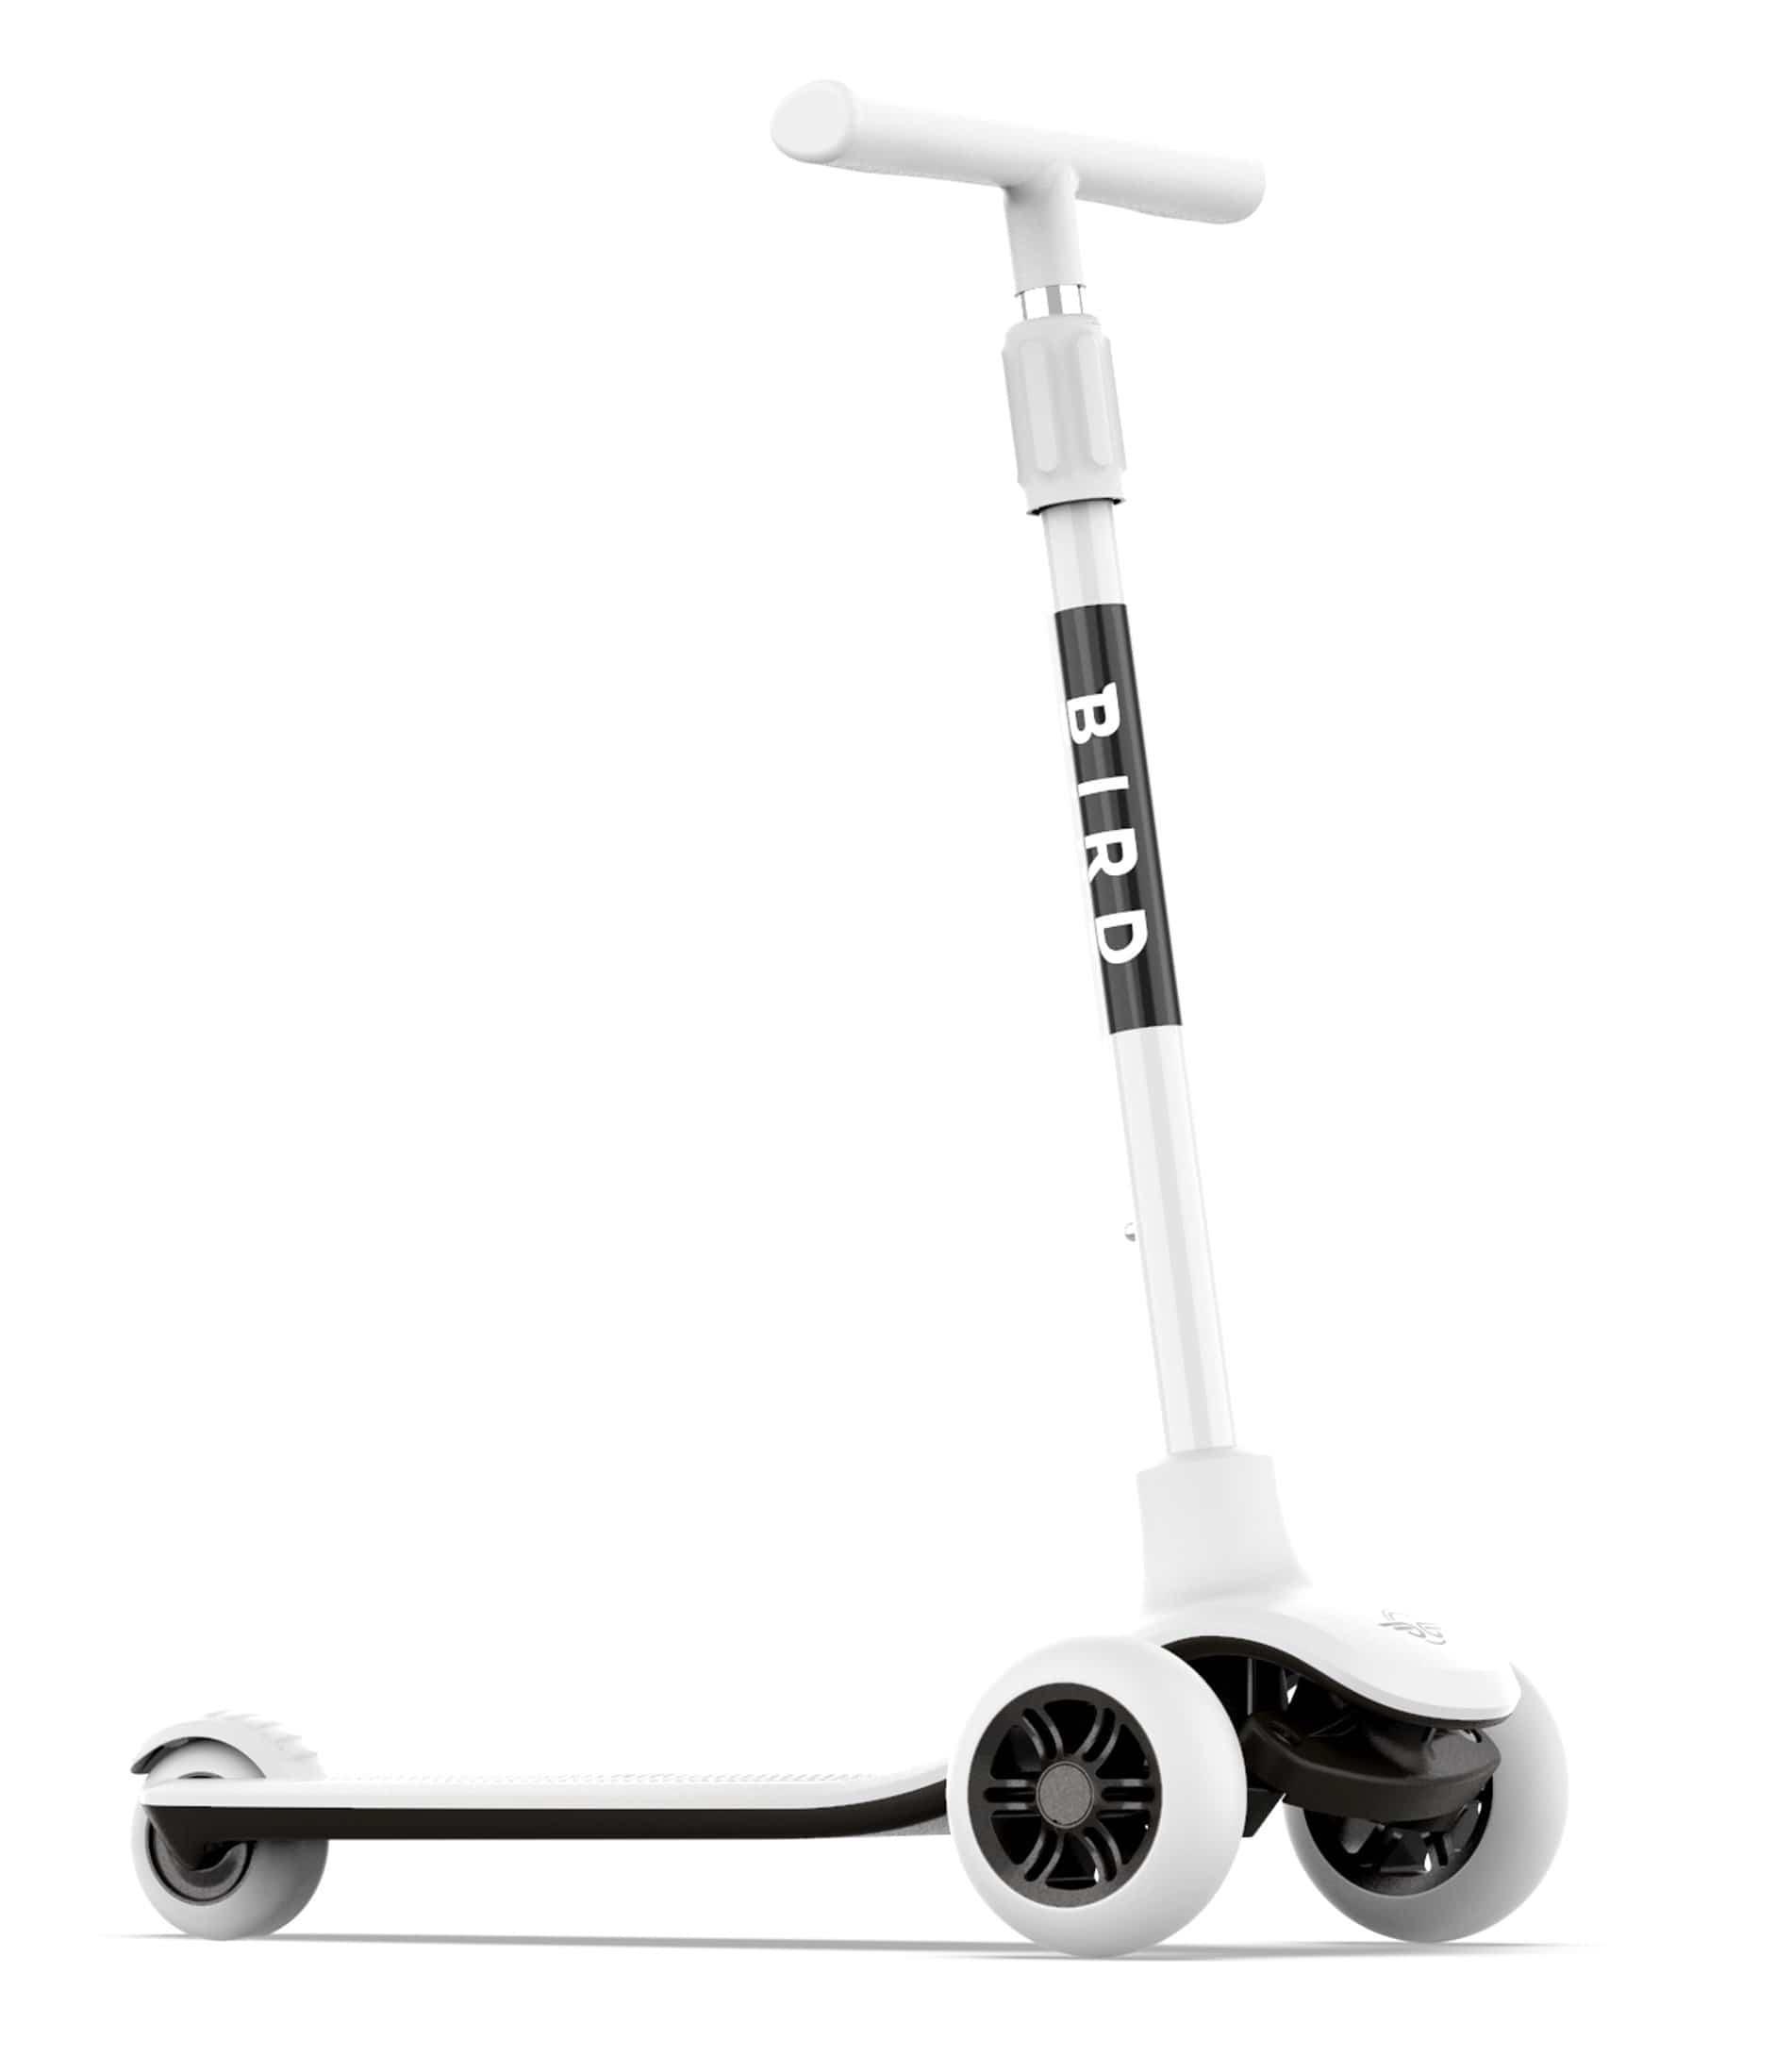 birdie kids scooter foldable kid scooter aircraft grade aluminum handle bar adjustable height portable compact stylish trendy 3 wheels design stomp brake system white